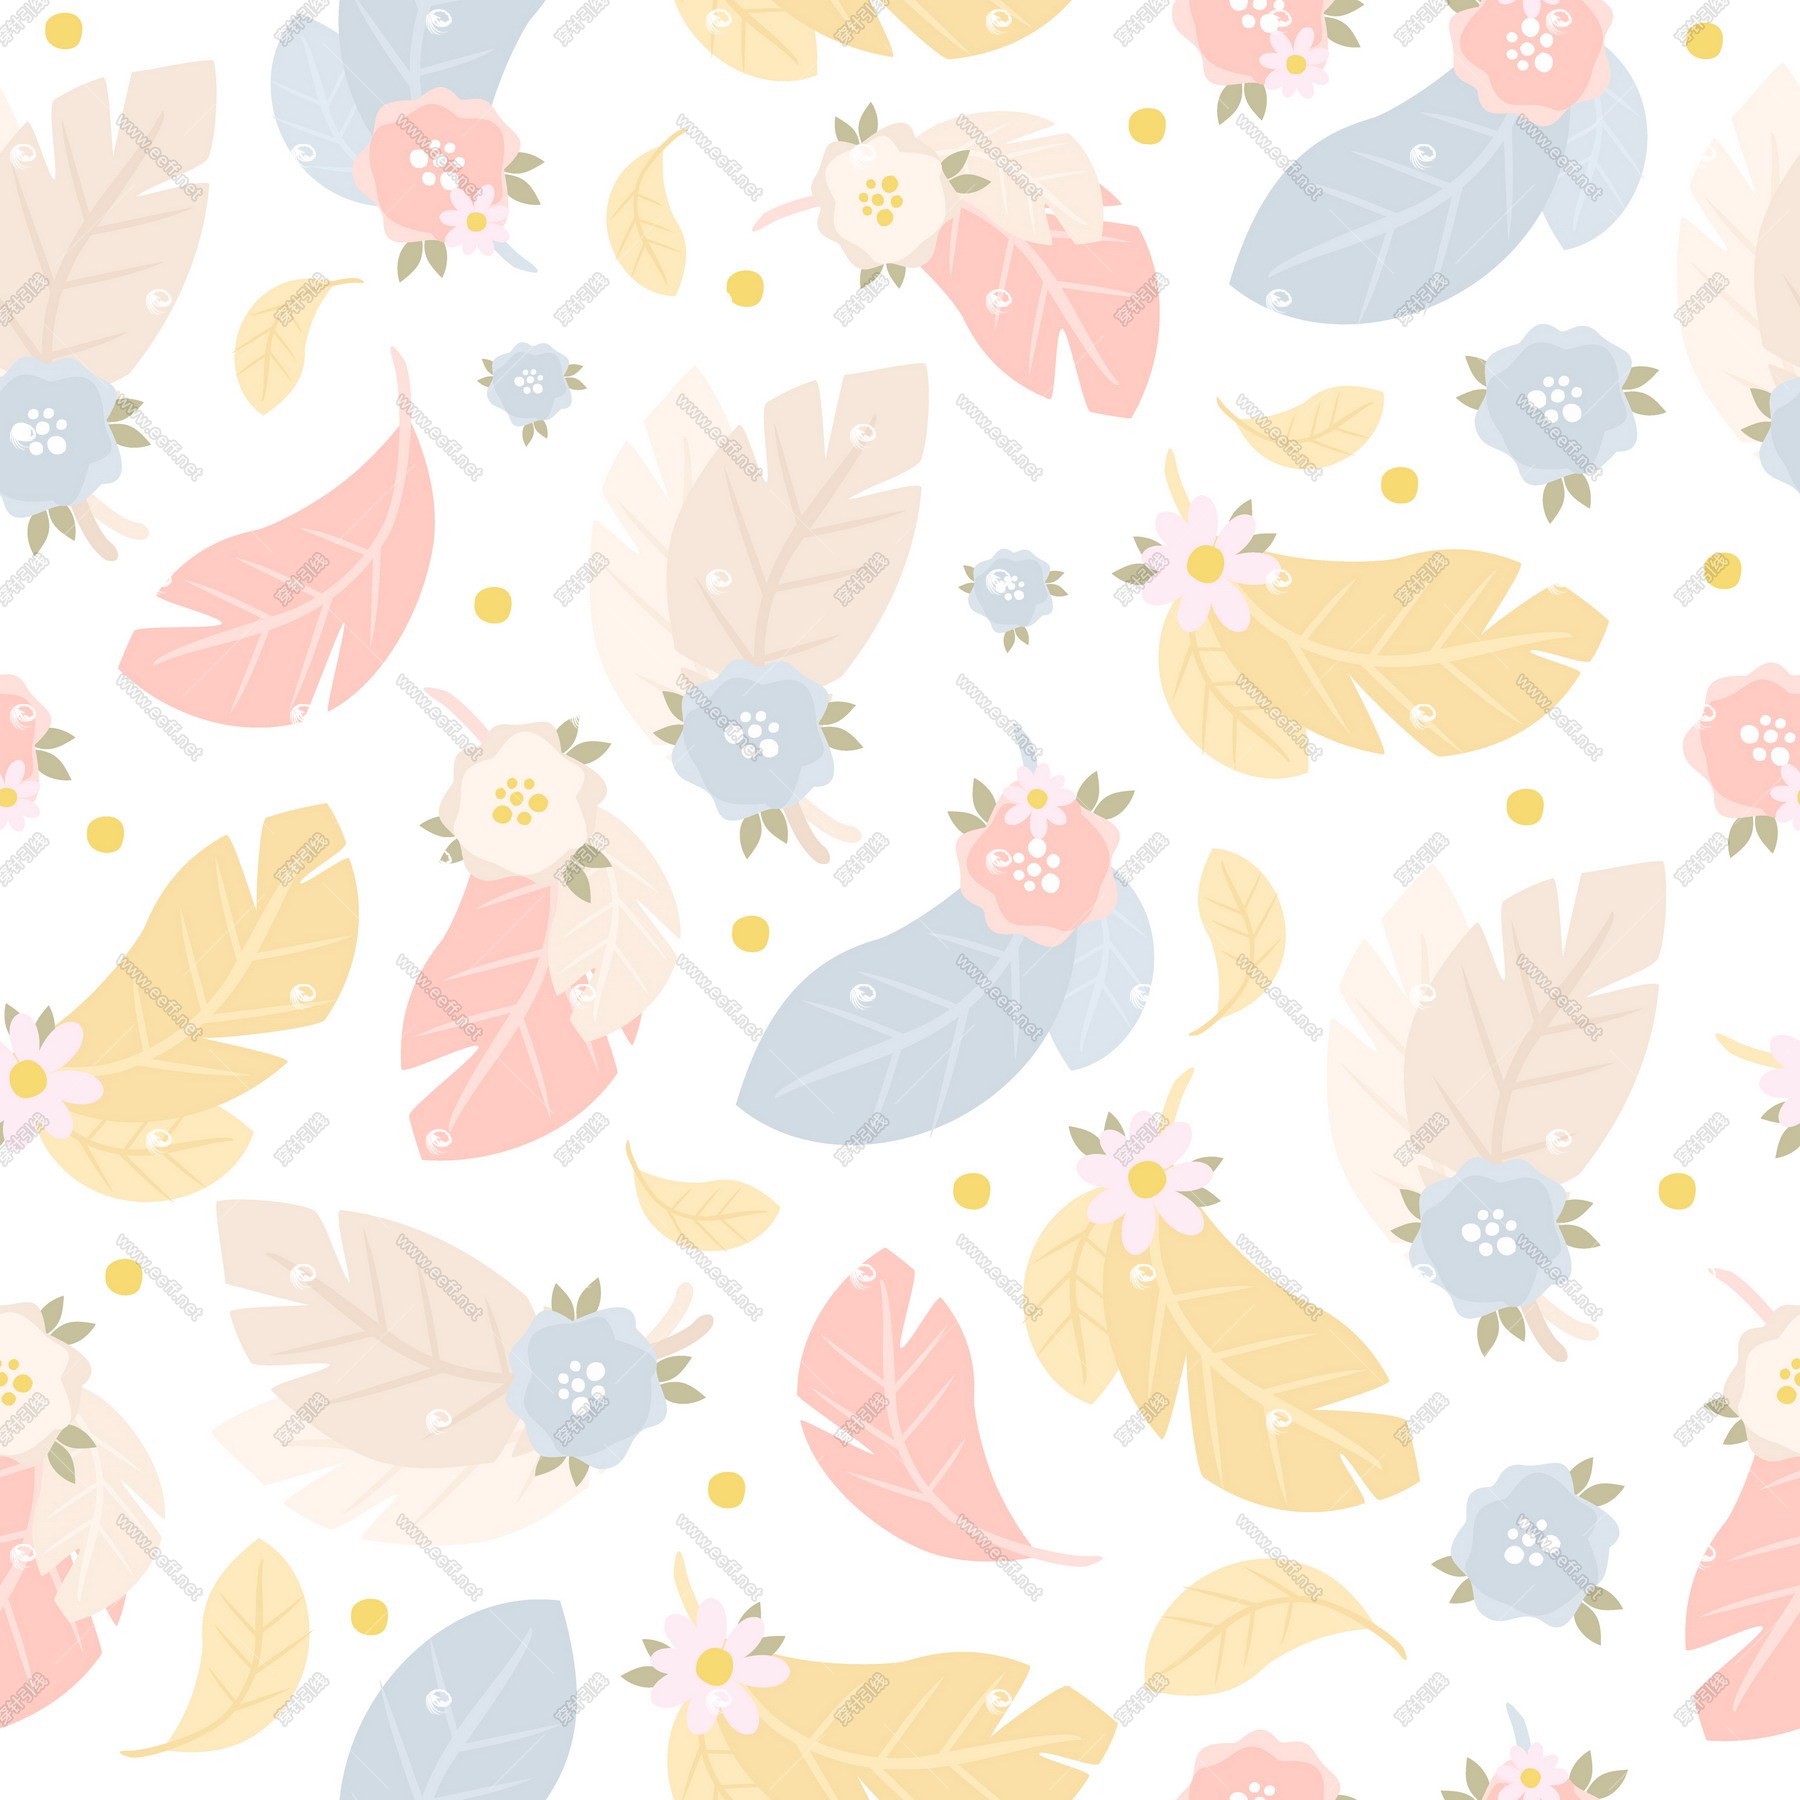 feathers_and_flowers_pattern-1